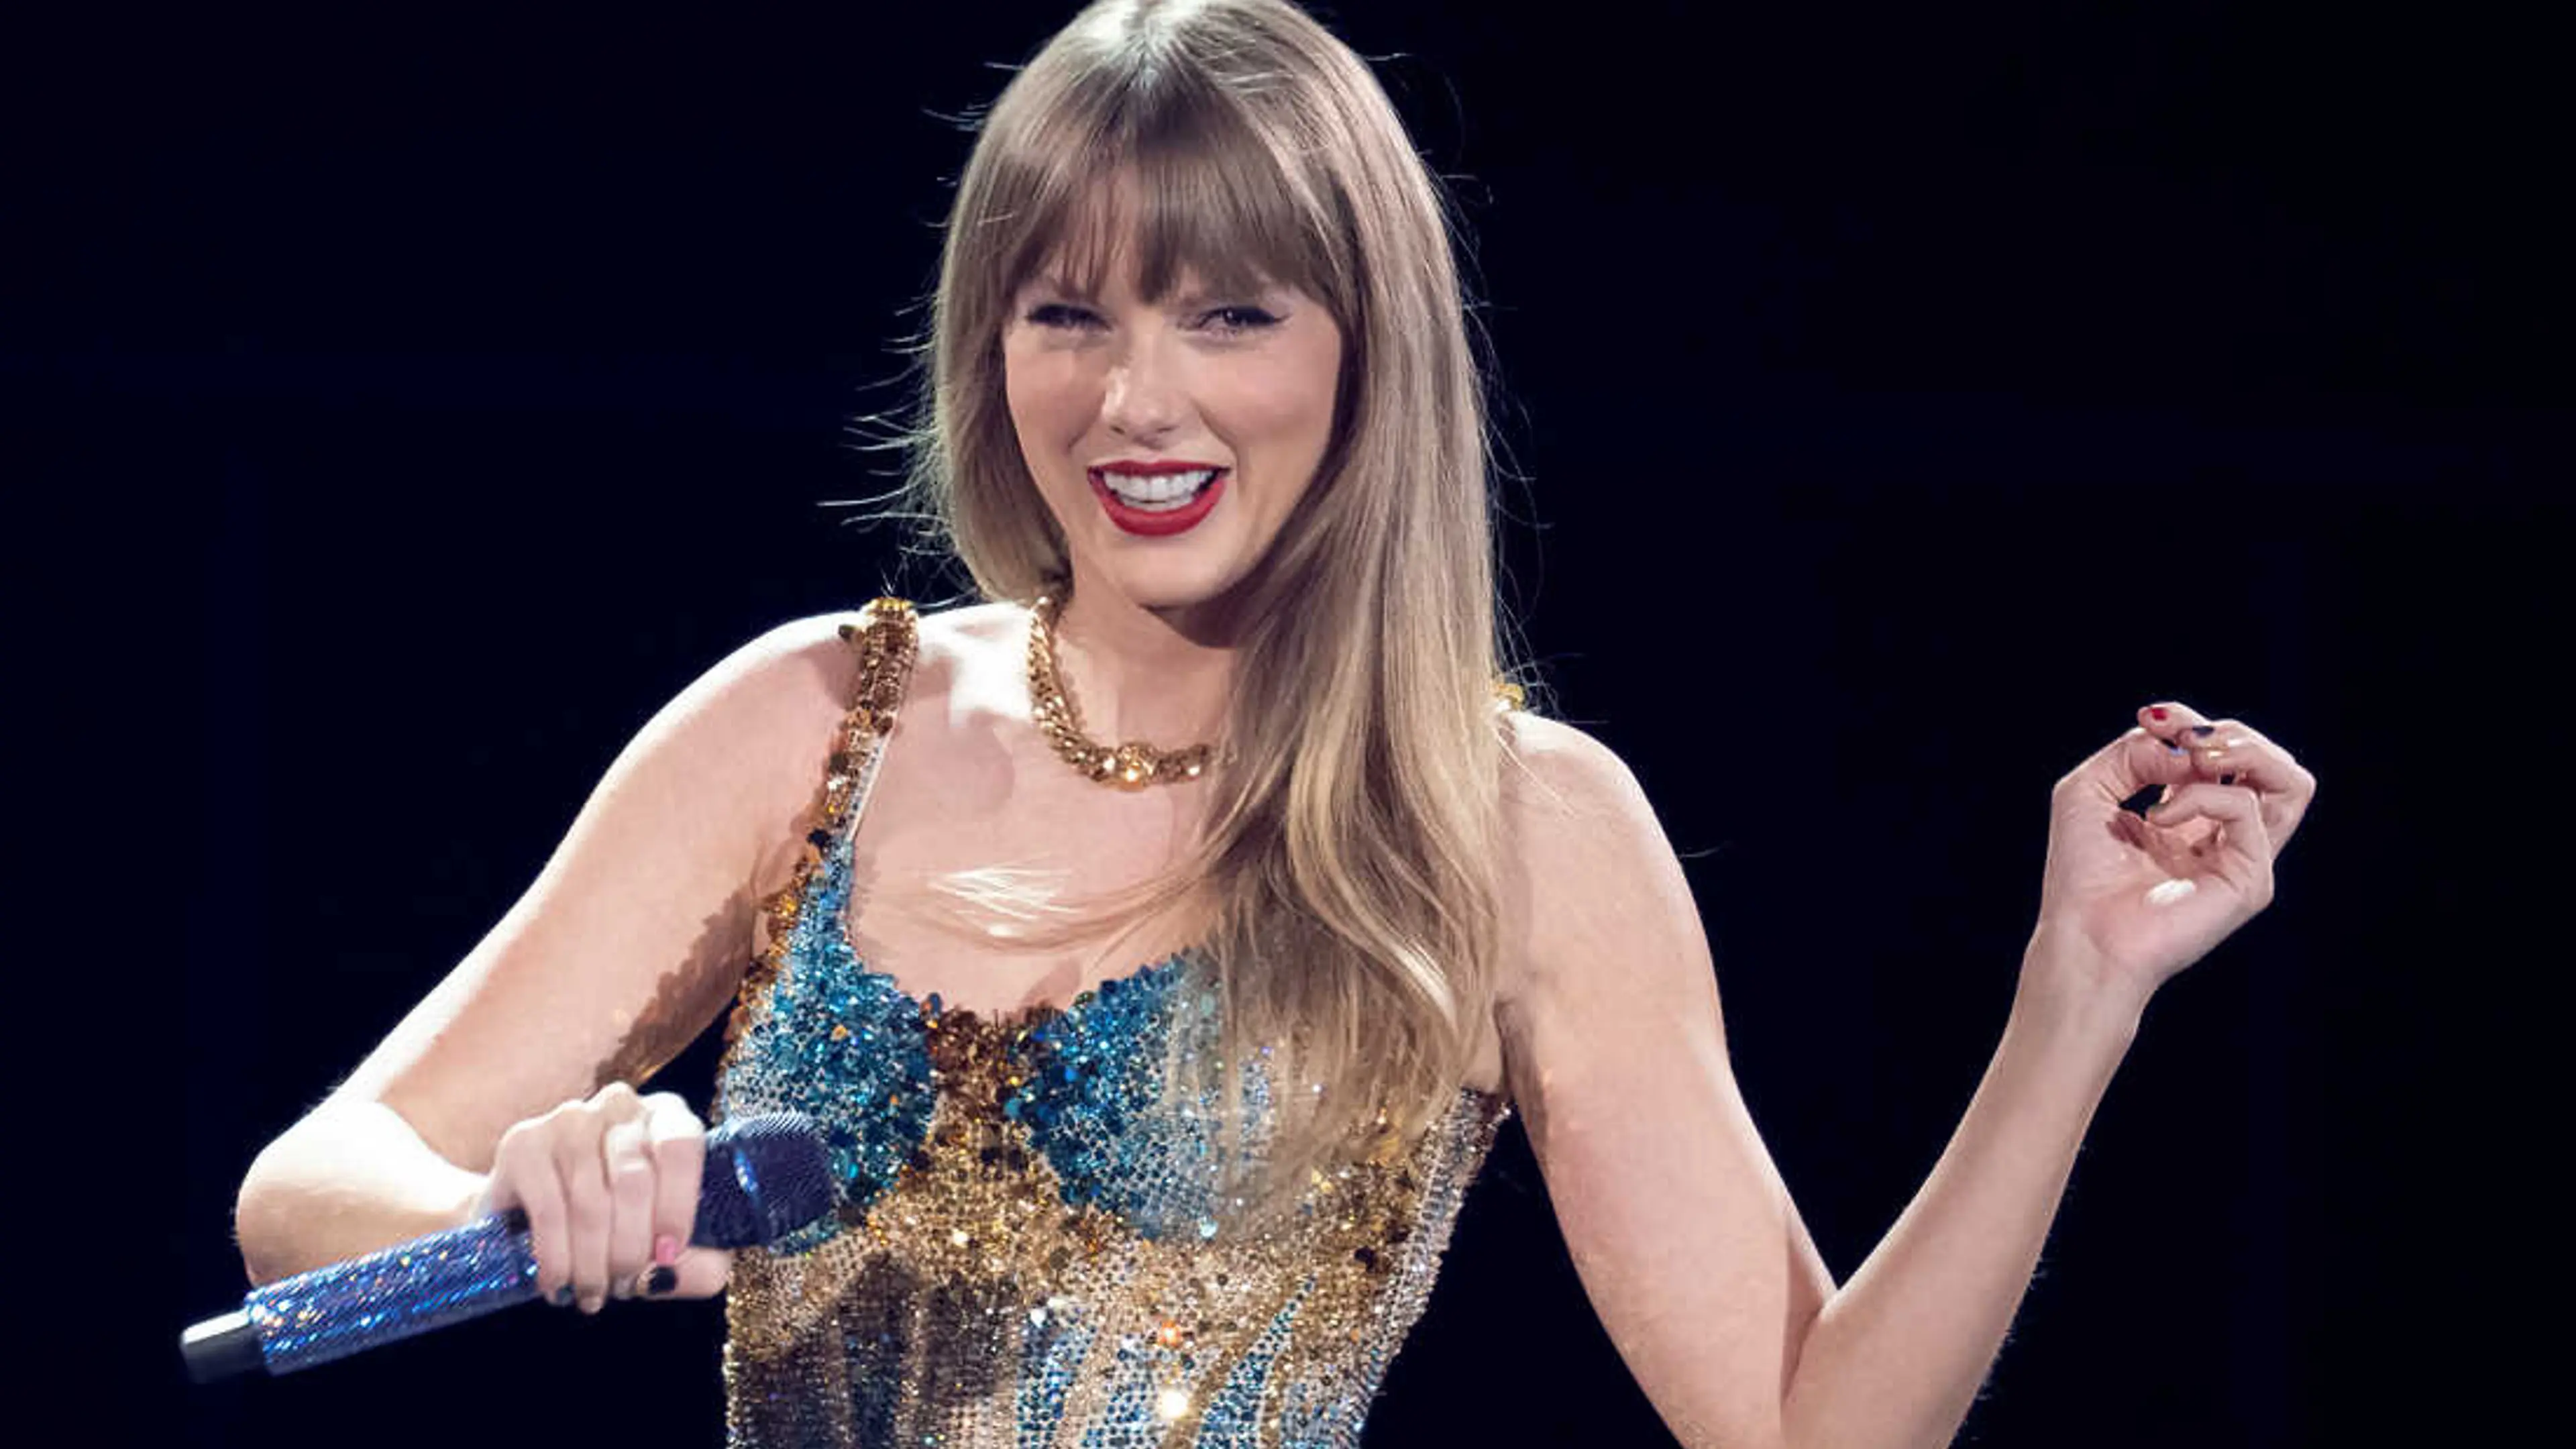 Taylor Swift's playbook: 7 business lessons for entrepreneurs